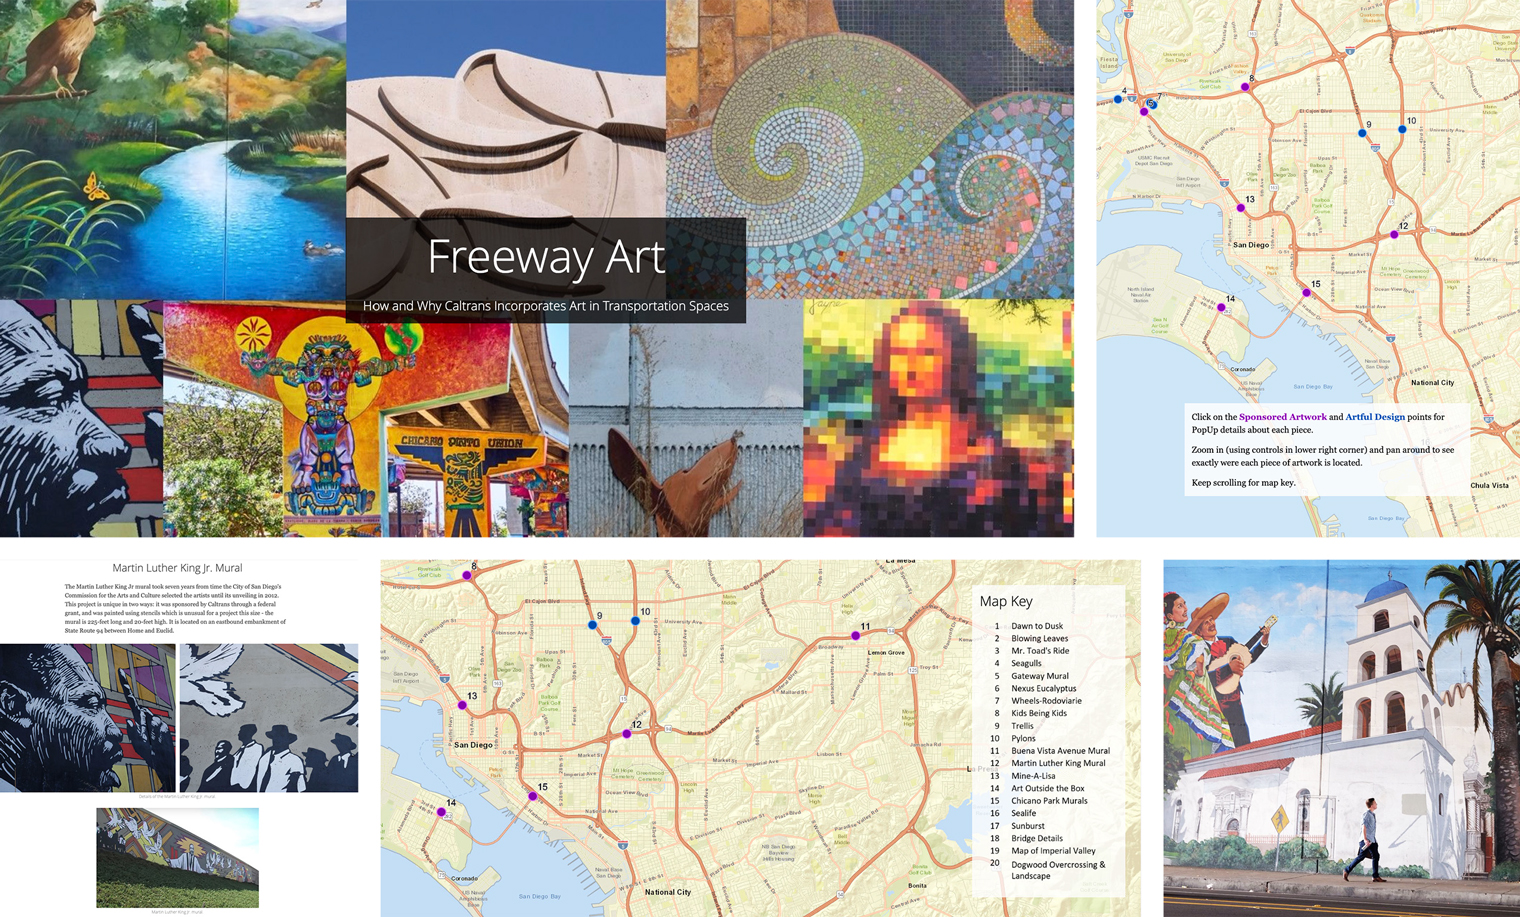 Photo collage of the Freeway Art story map showing map locations and photographs of murals in a couple locations in the area.